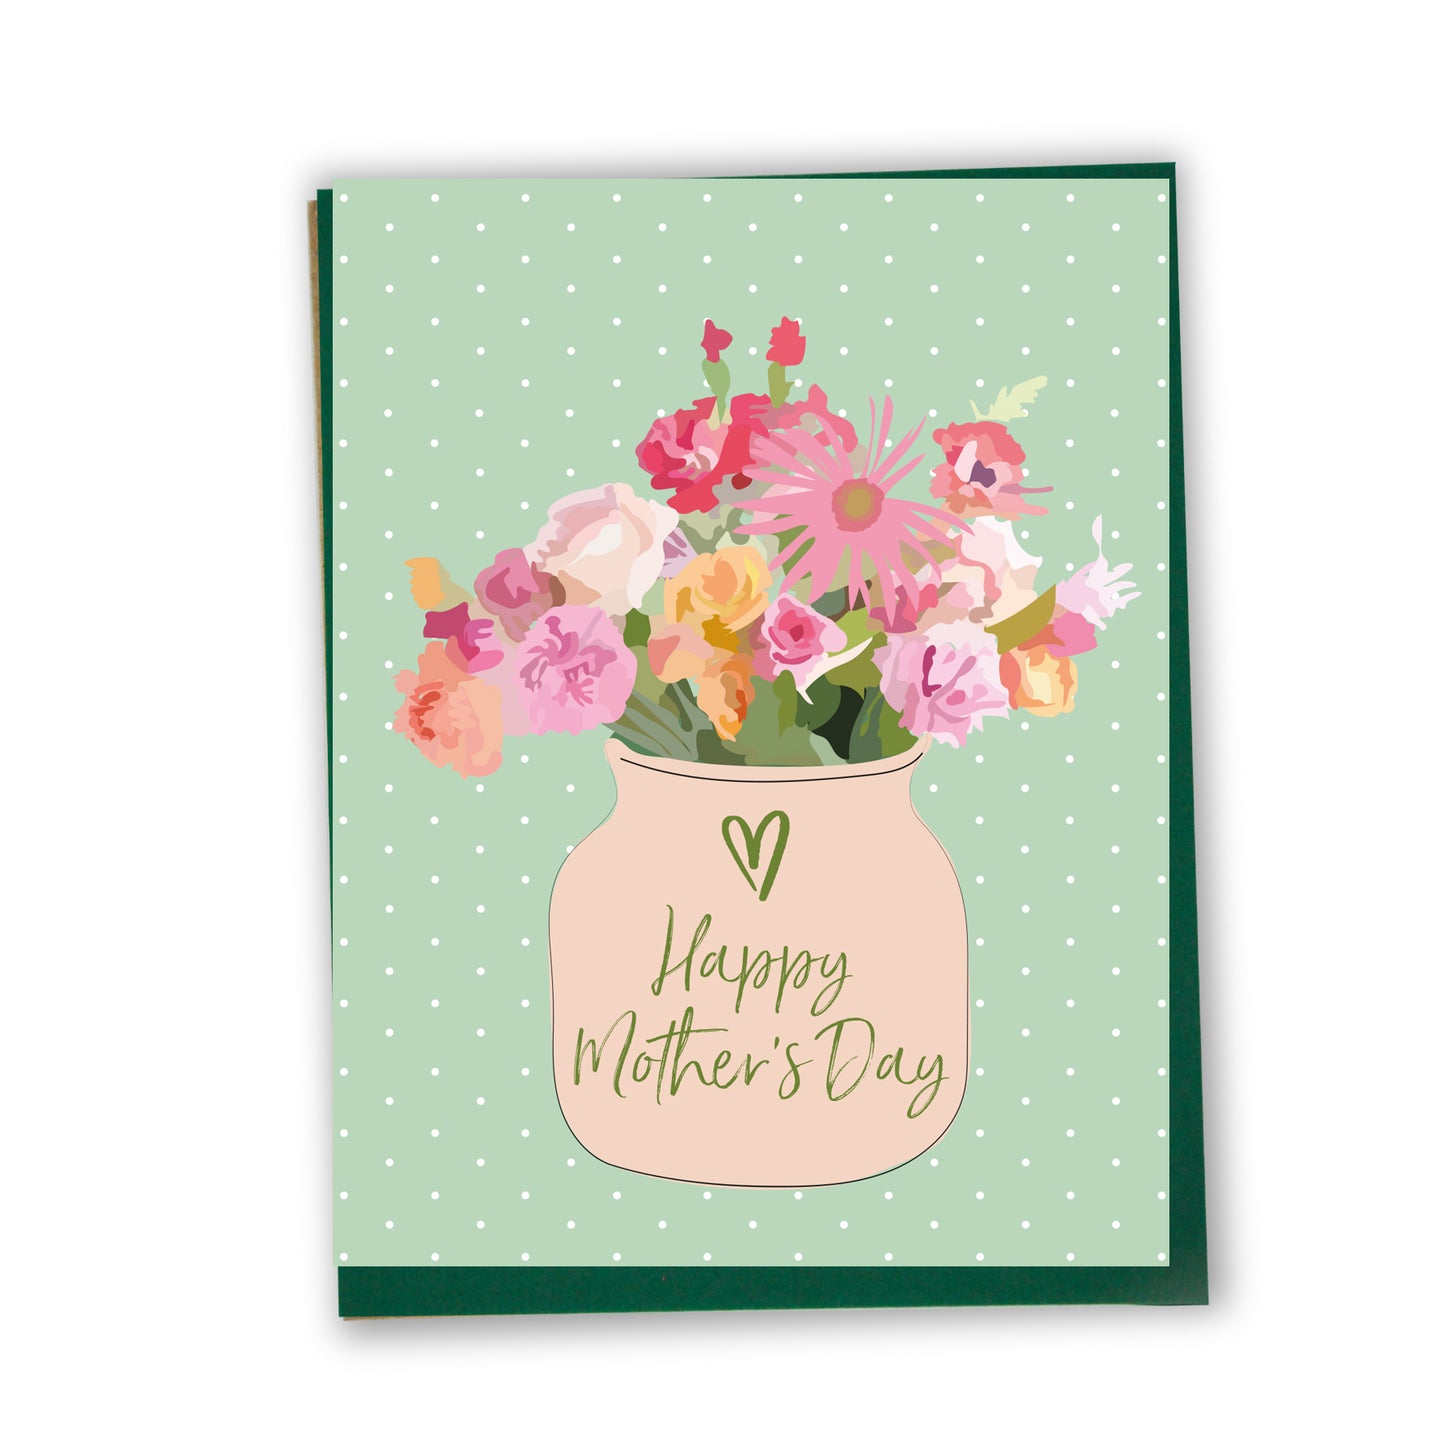 Happy Mother's Day - flowers